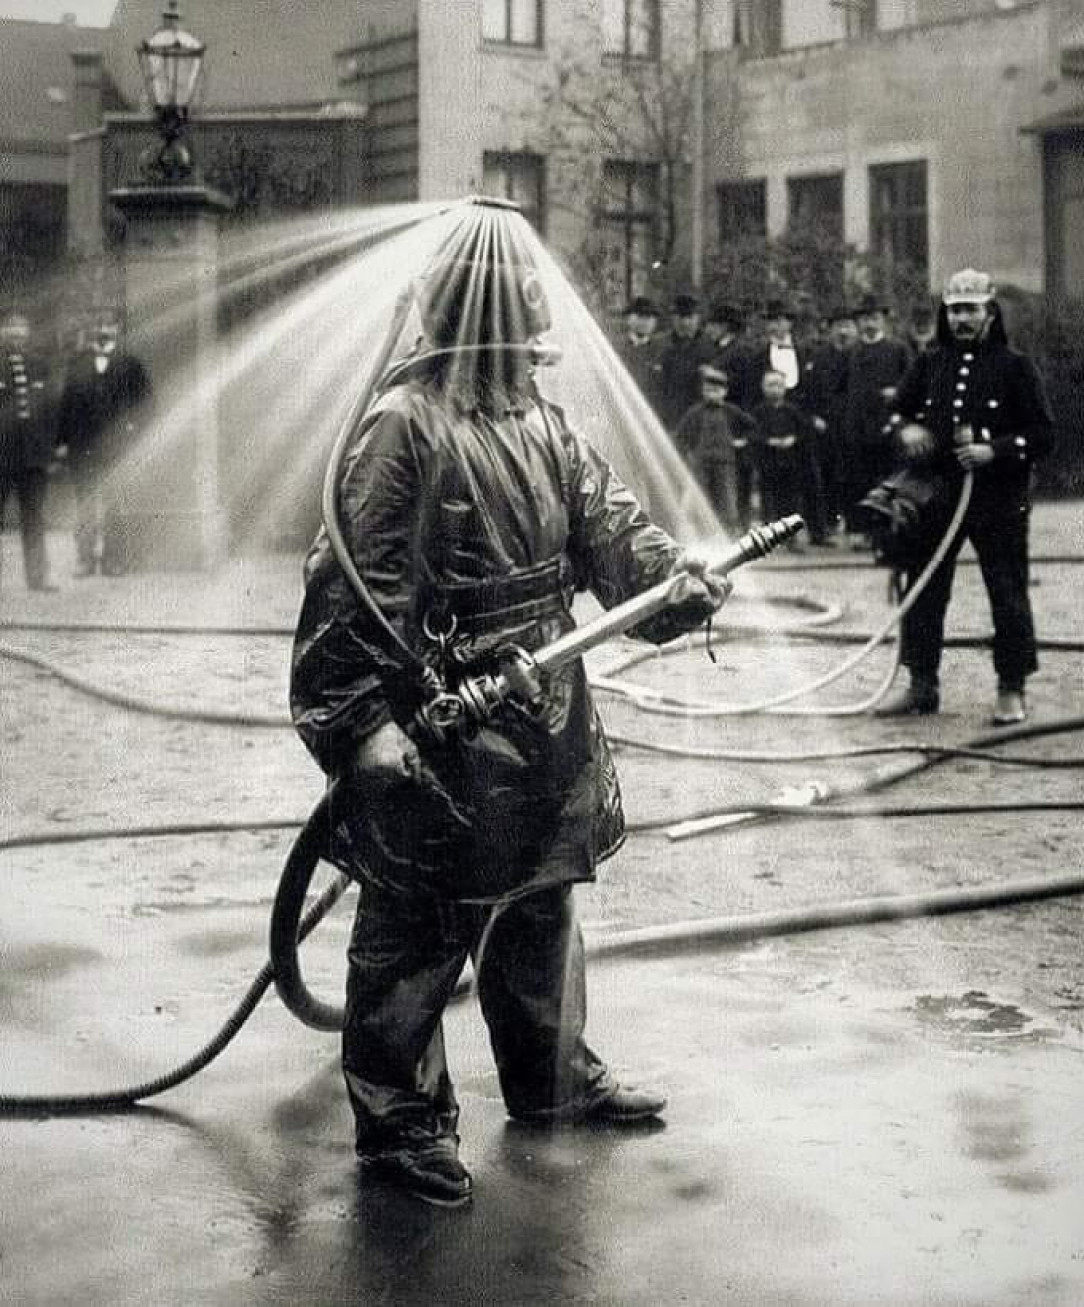 Early 1900’s fireman suit